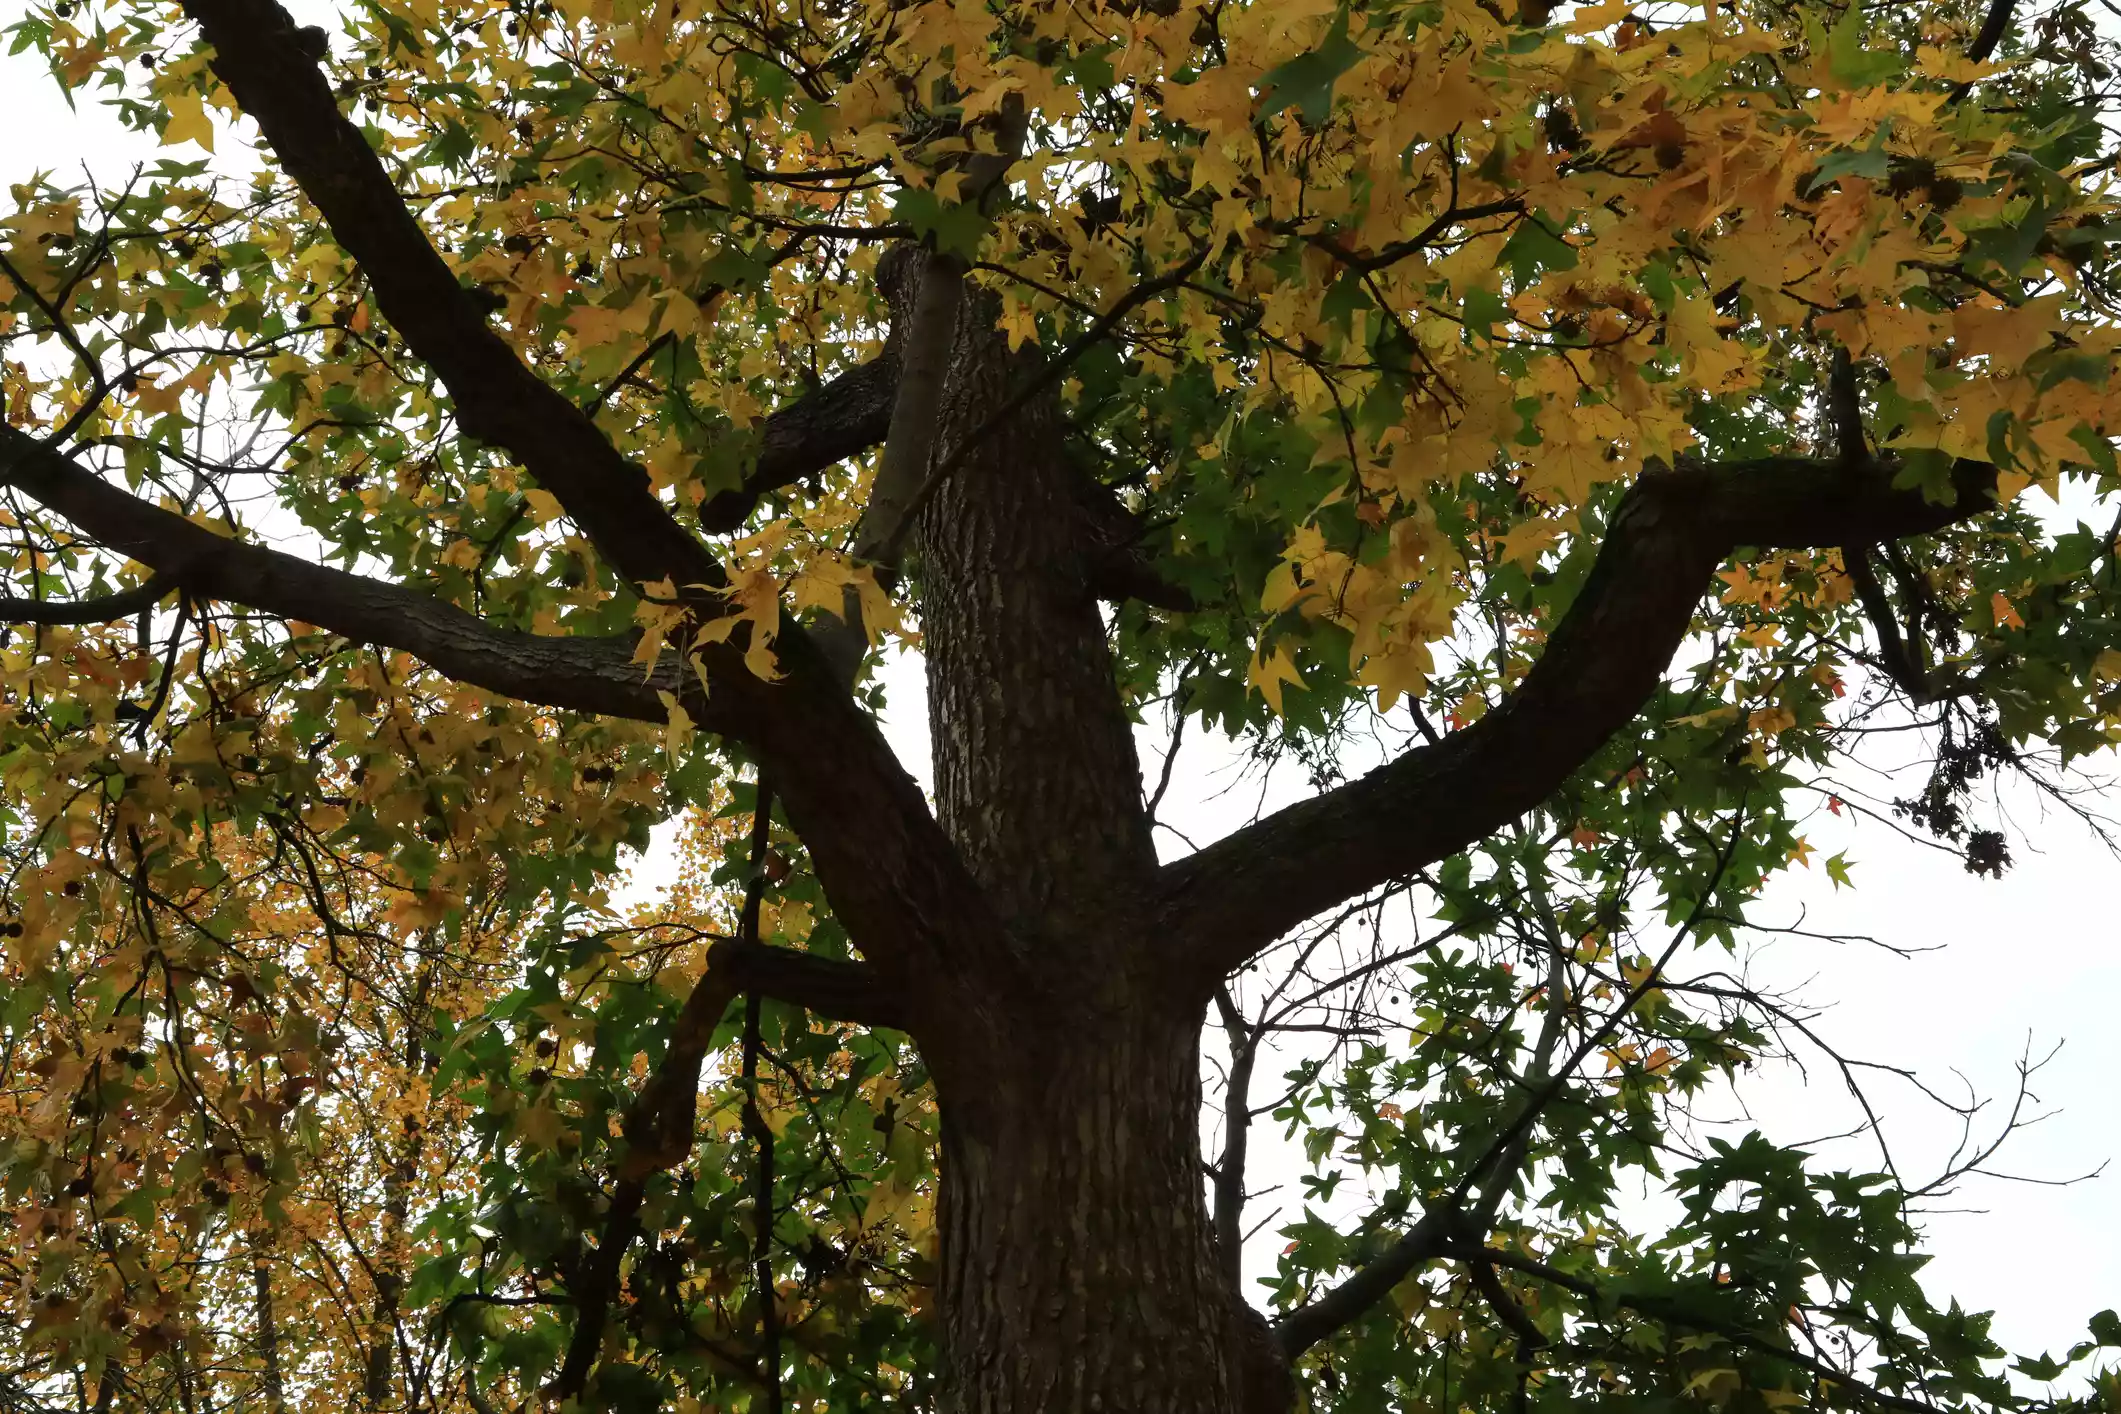 American sweetgum with yellow and green flowers and brown trunk from below